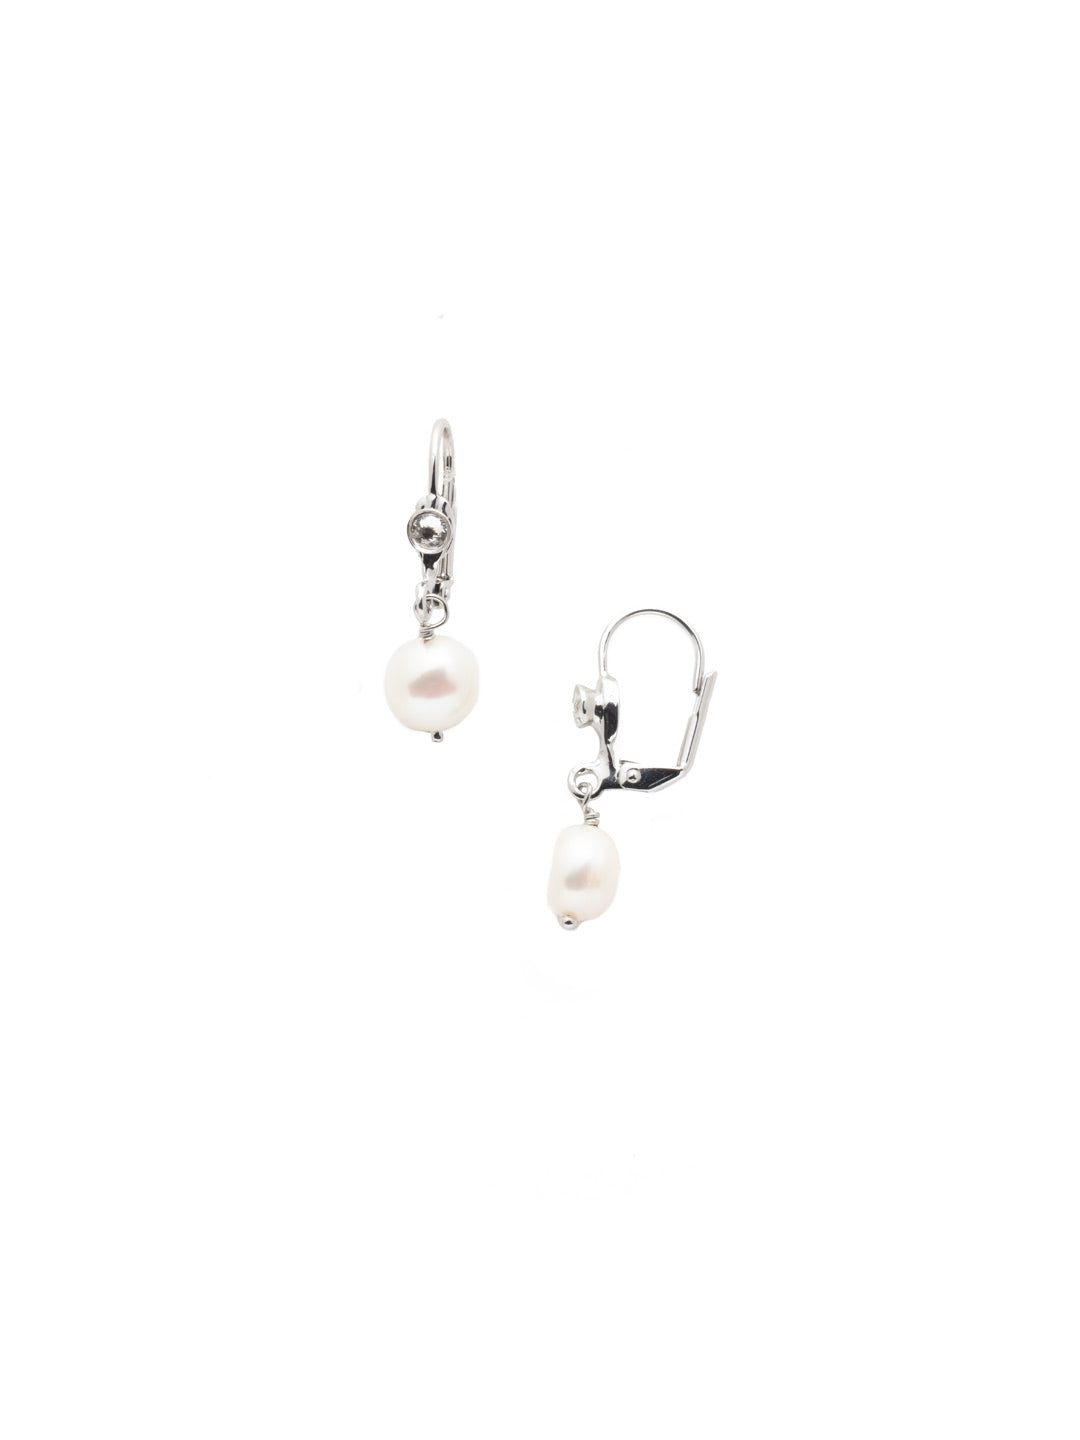 Narelle Dangle Earrings - EEF14PDCRY - <p>Anchored on a lever-back post, these luminous pearls dangle from a line of gold atop a brilliant crystal. These dainty earrings are perfect for a day in the office or a night on the town. From Sorrelli's Crystal collection in our Palladium finish.</p>